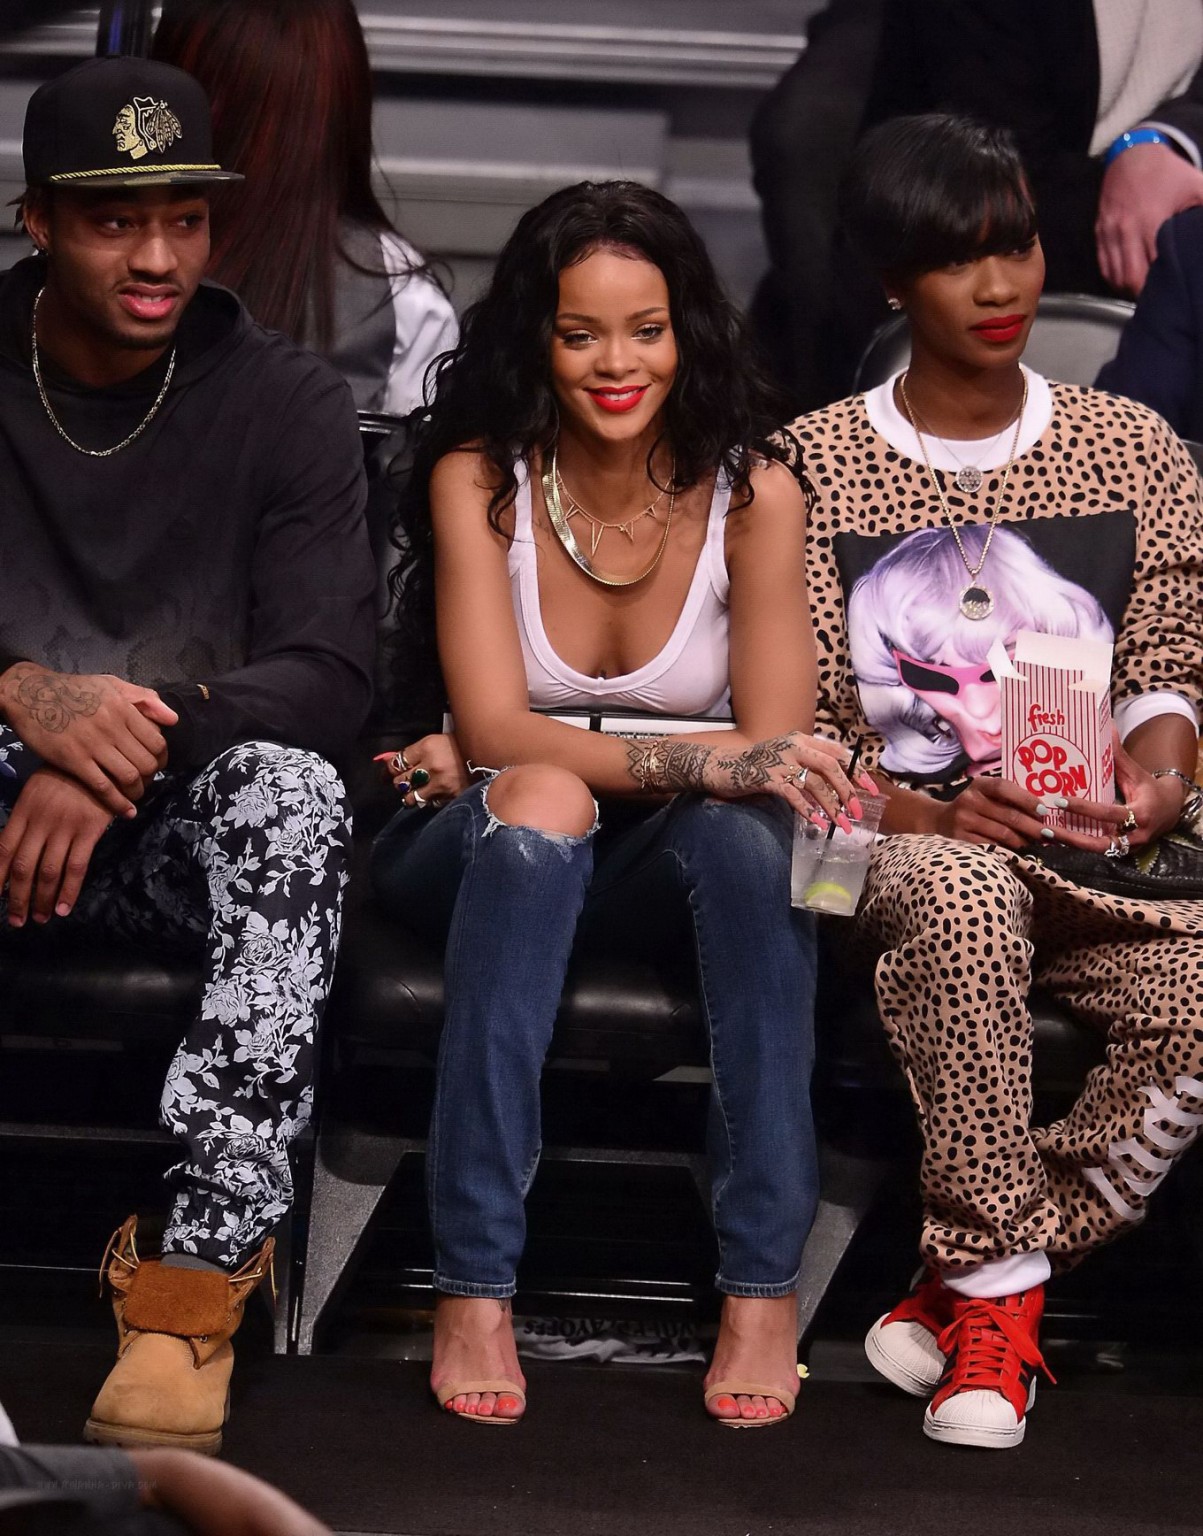 Rihanna shows off her boobs in seethru top at a basketball game in NYC #75198063